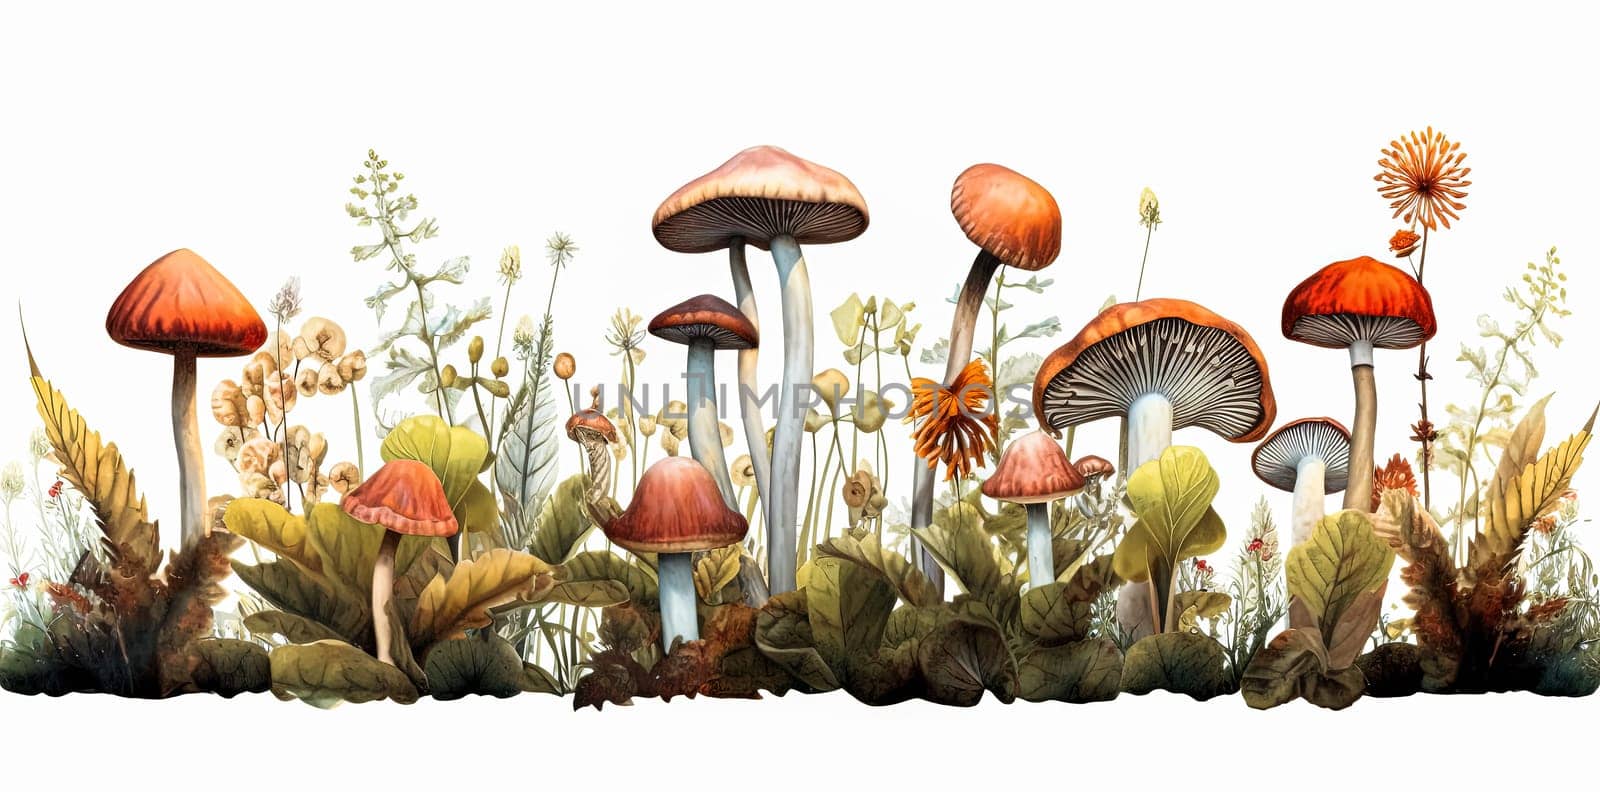 A row of mushrooms are shown in a field of grass. The mushrooms are orange and white, and they are scattered throughout the field. The image has a peaceful and serene mood